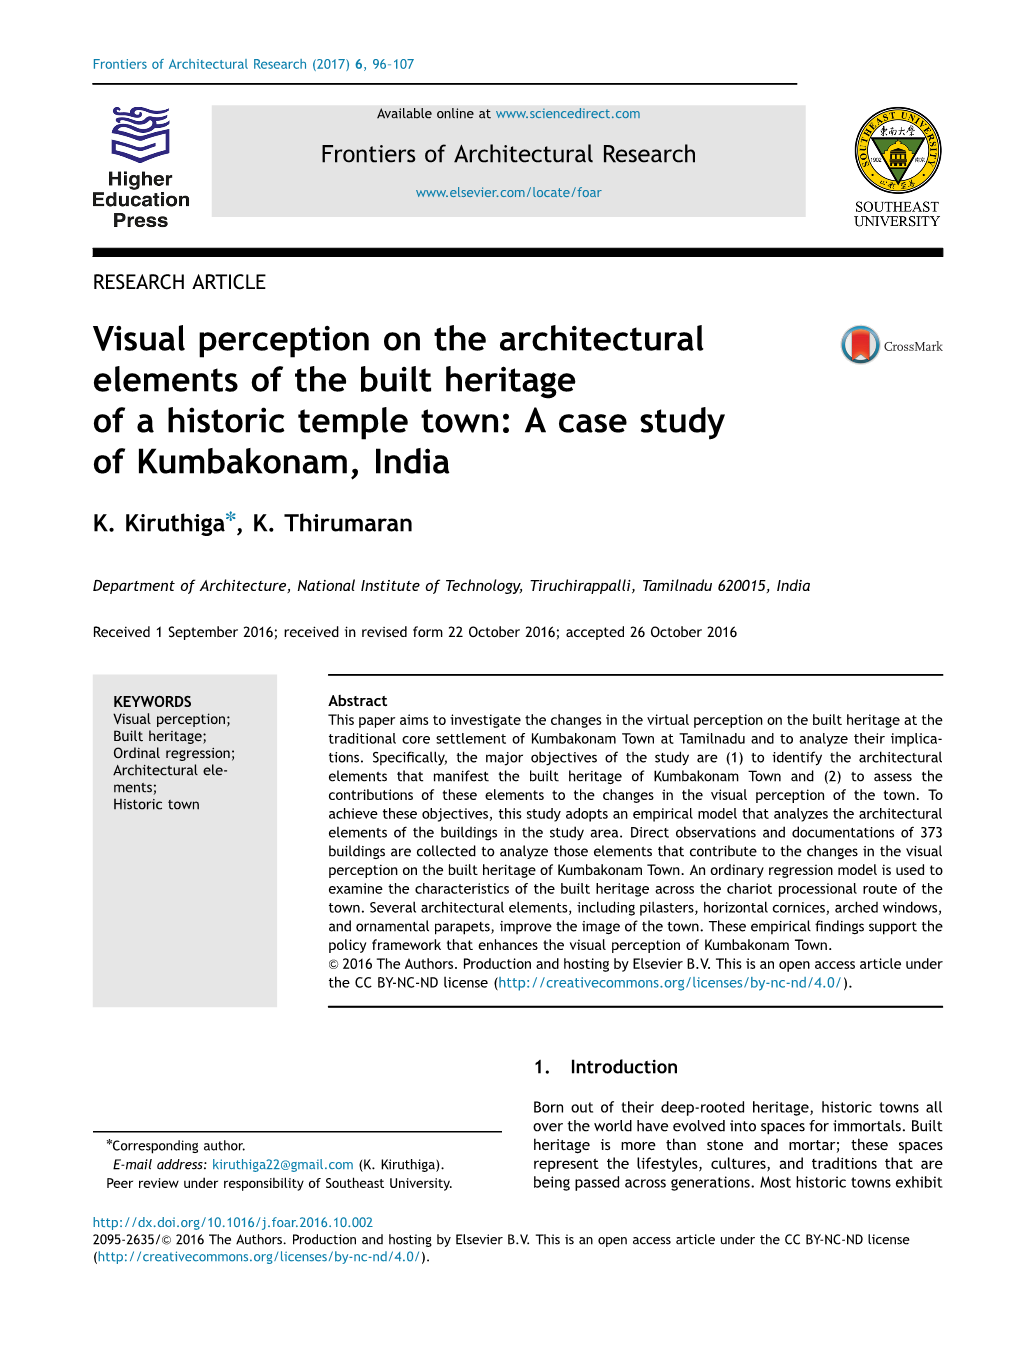 Visual Perception on the Architectural Elements of the Built Heritage of a Historic Temple Town a Case Study of Kumbakonam